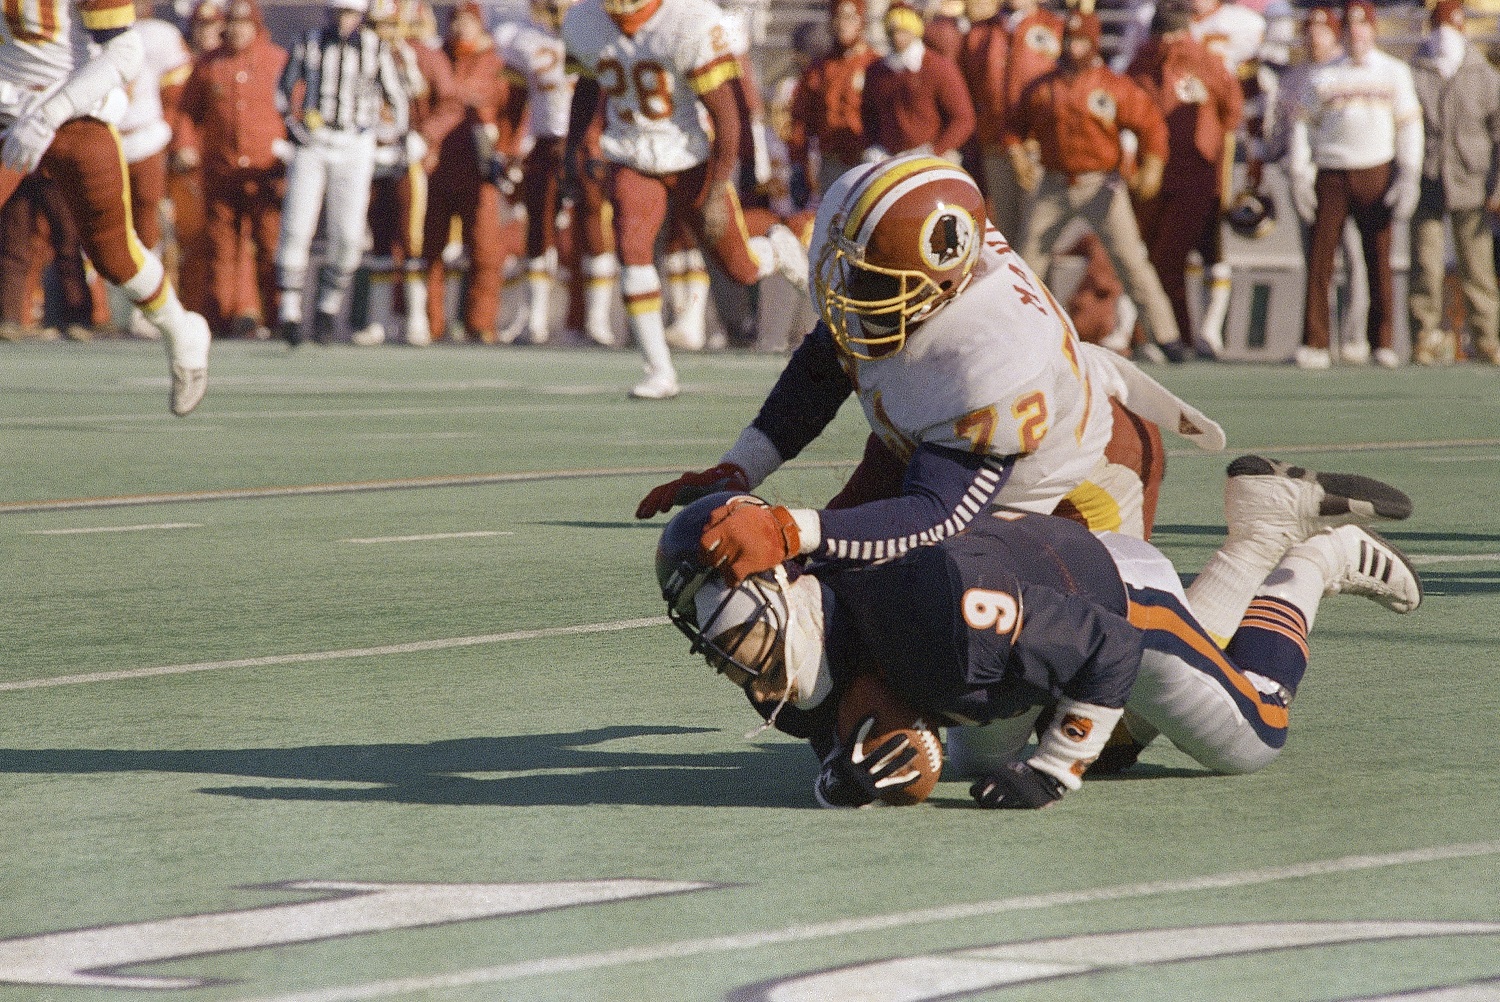 Bears quarterback Jim McMahon (9) is sacked by Redskins Dexter Manley during first quarter action in Chicago on Sunday, Jan. 10, 1988. (AP Photo/Mark Elias)